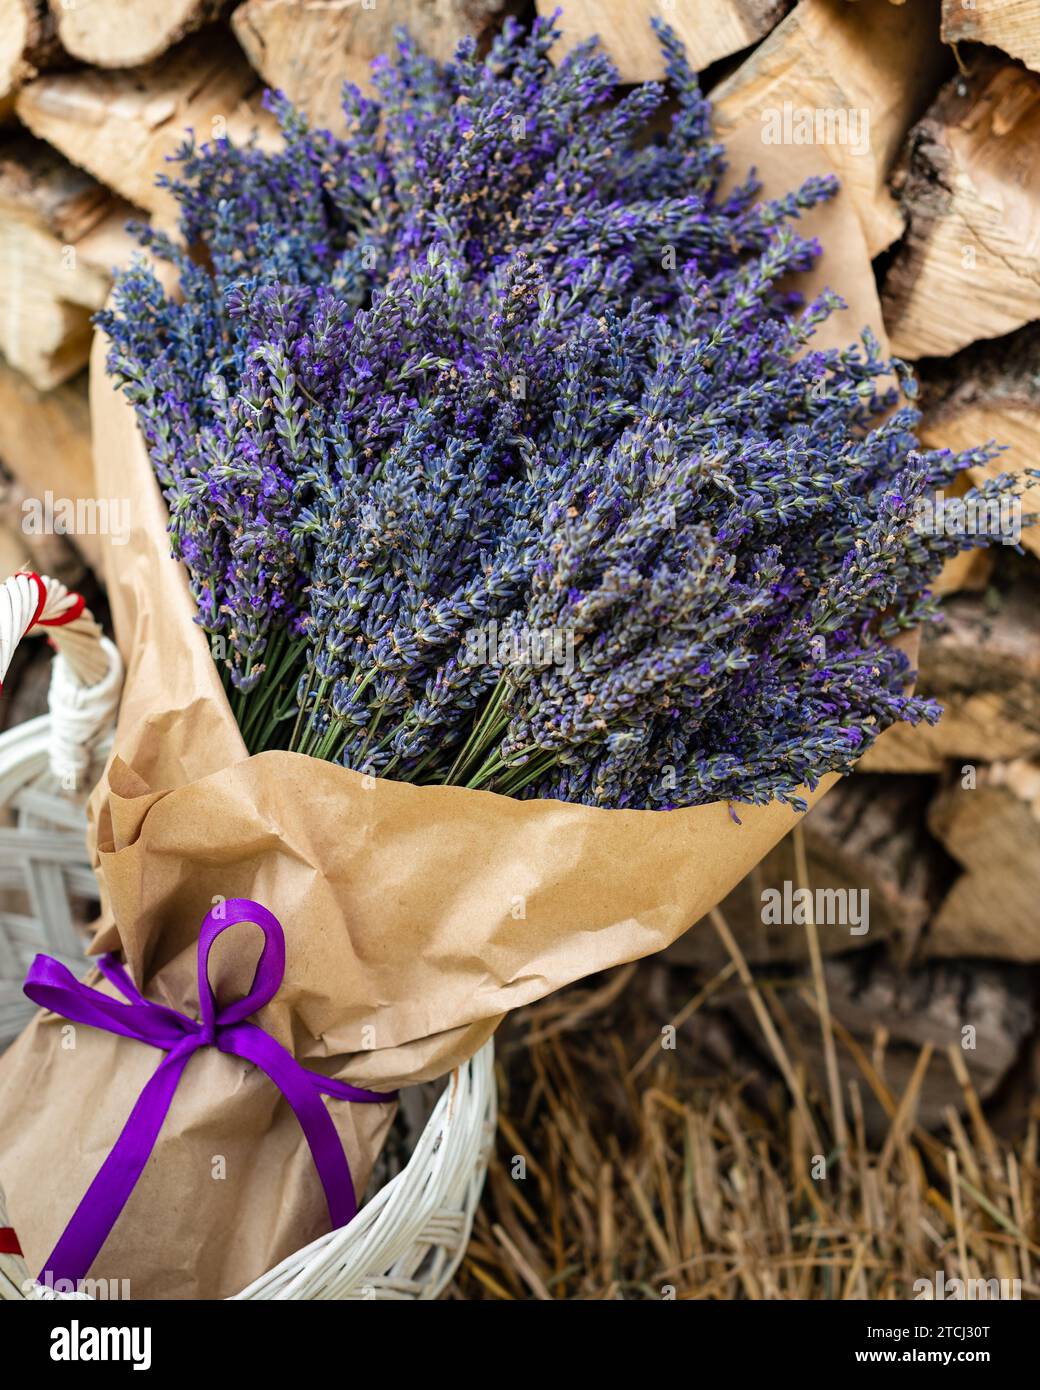 A lush and large bouquet of lavender wrapped in brown paper on a background of firewood Stock Photo